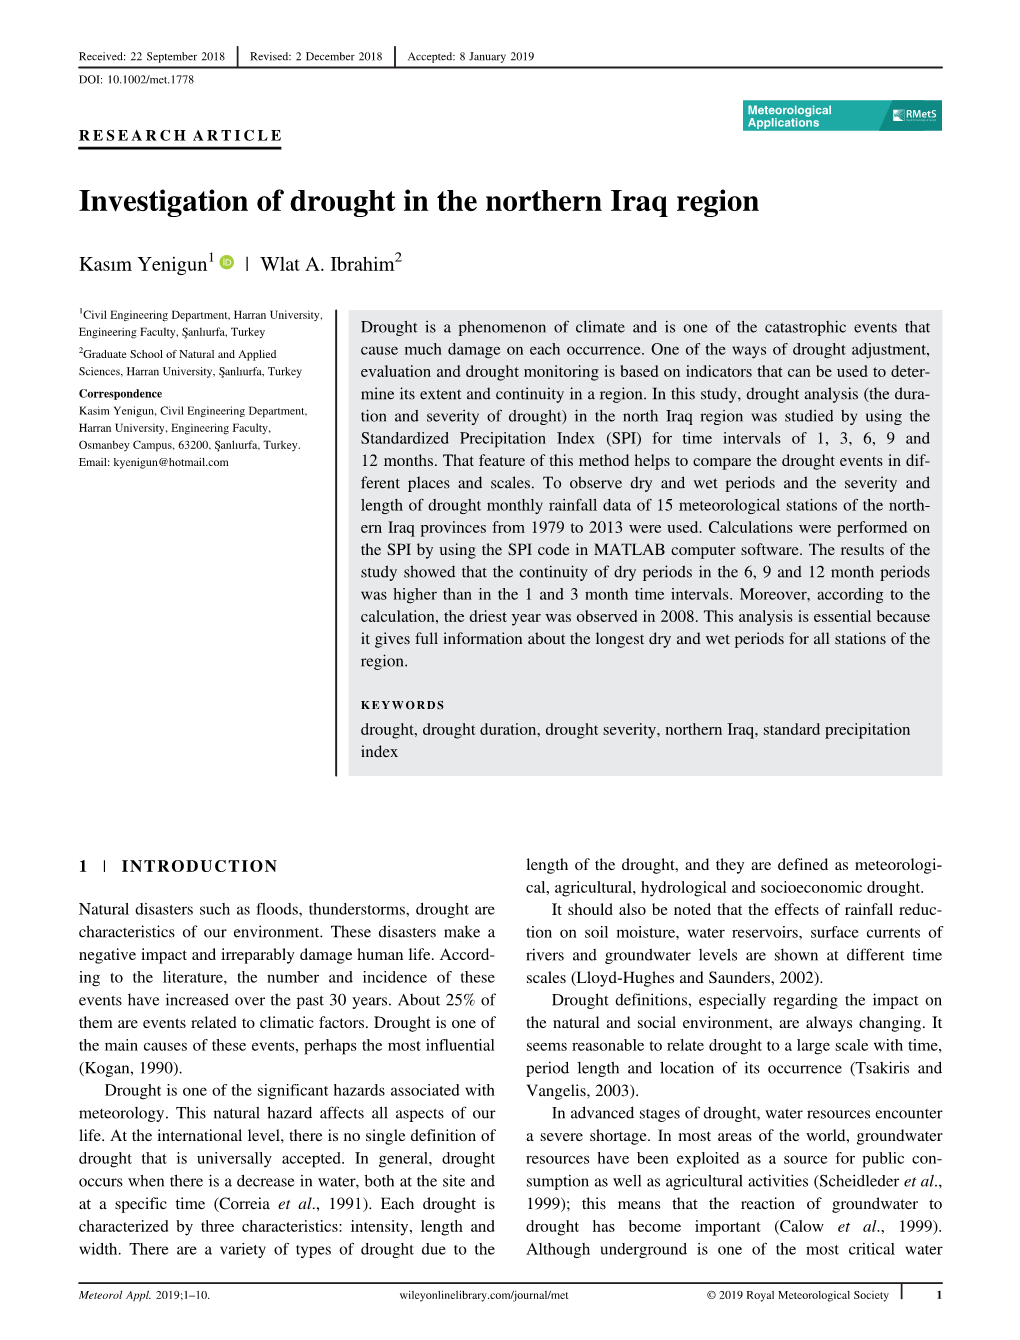 Investigation of Drought in the Northern Iraq Region